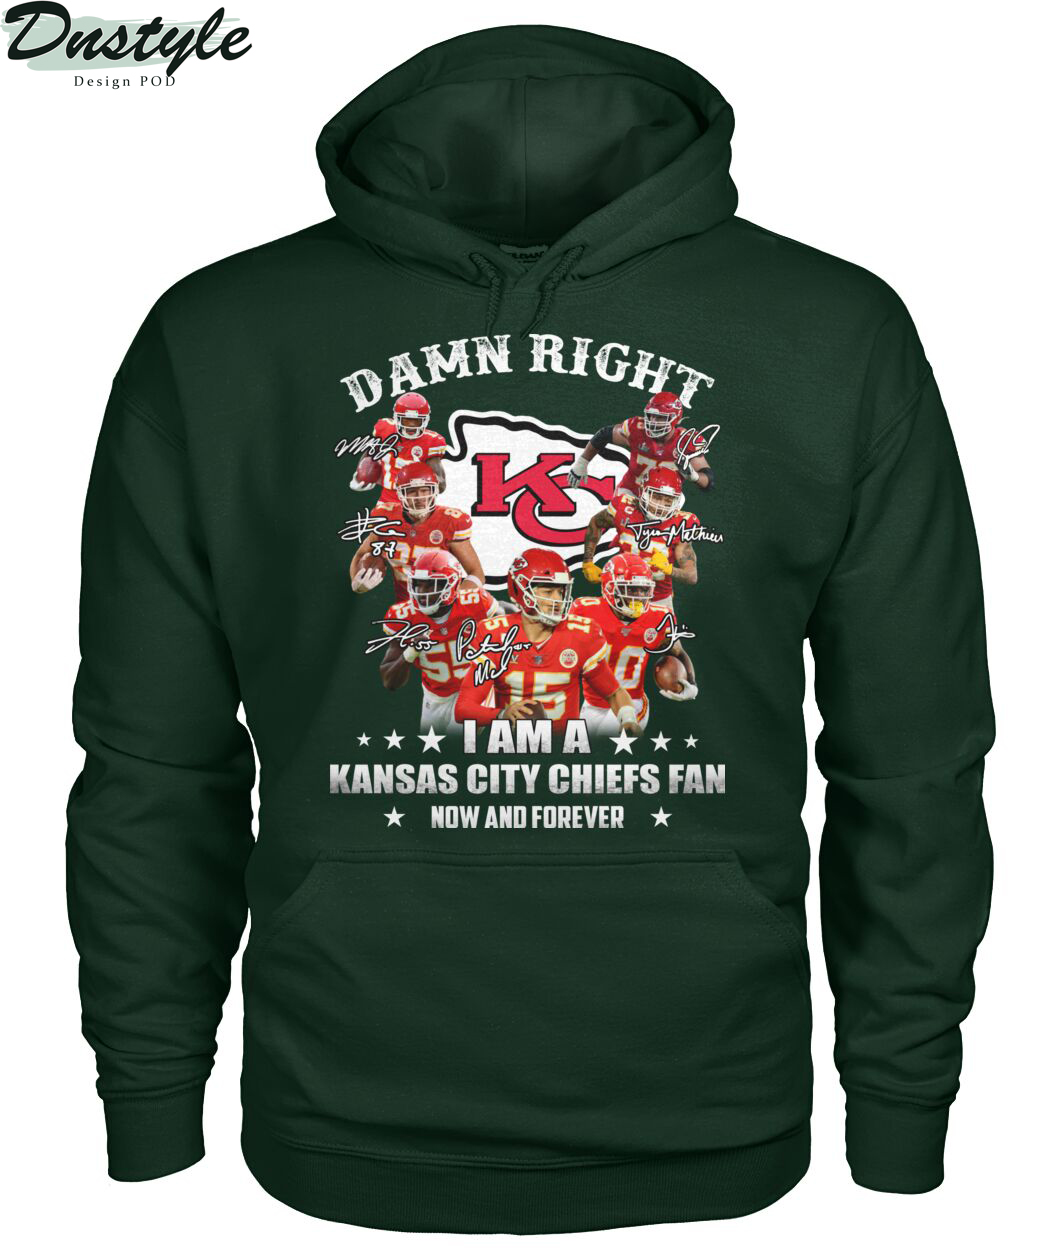 Damn right I am a Kansas city chiefs fan now and forever hoodie